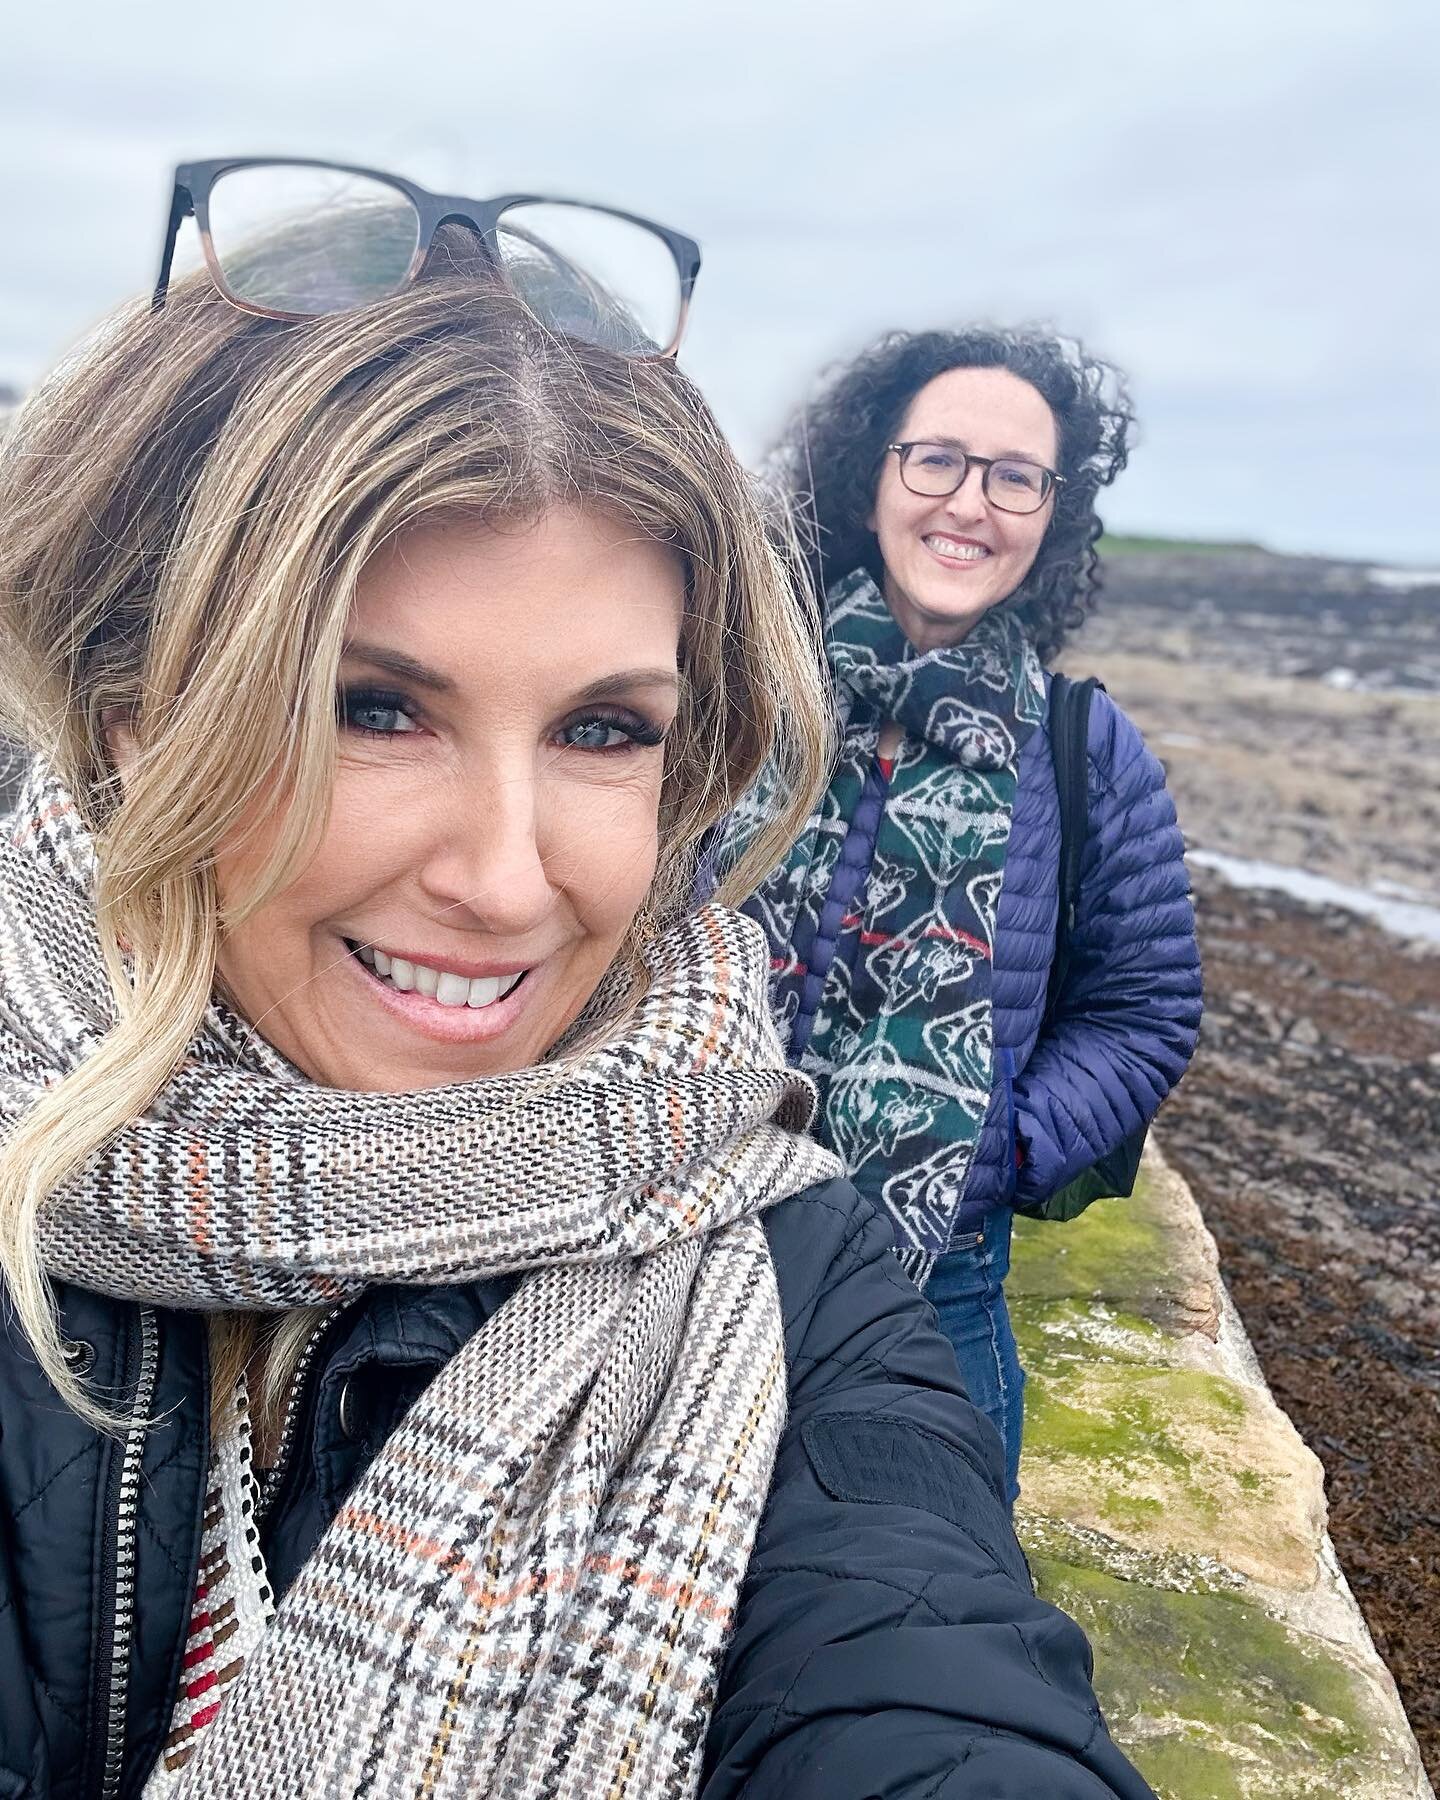 The usual suspects, back at the scene of the shrine with @monettechilson 

Love exploring the sacred feminine throughout Scotland. ❤️

Yesterday Pittenweem 🍀
Today St. Andrews 🔔

@thelibbybunten just stopped at the visitors center and picked you up